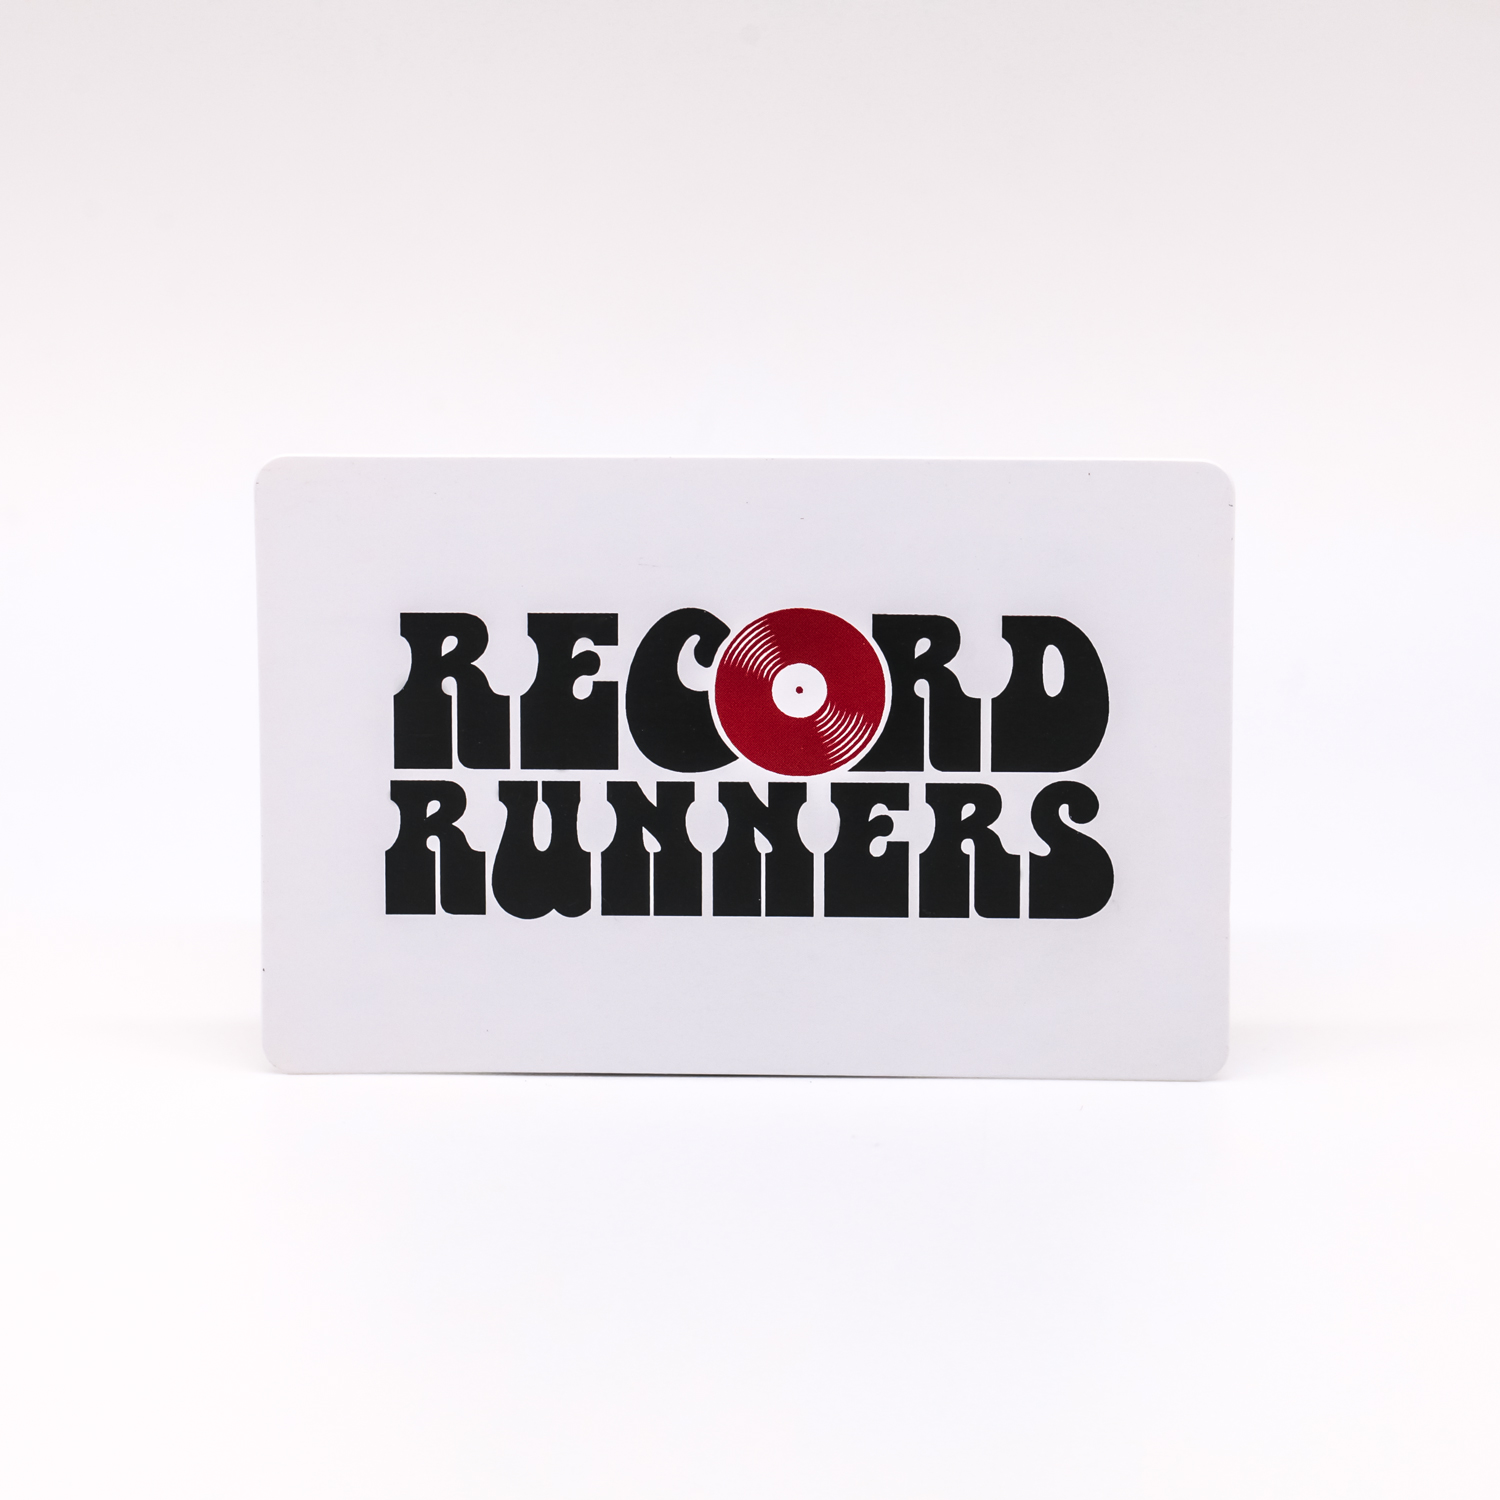 diego-cinquegrana-the-golden-torch-web-design-record-runners-music-store-varese-6